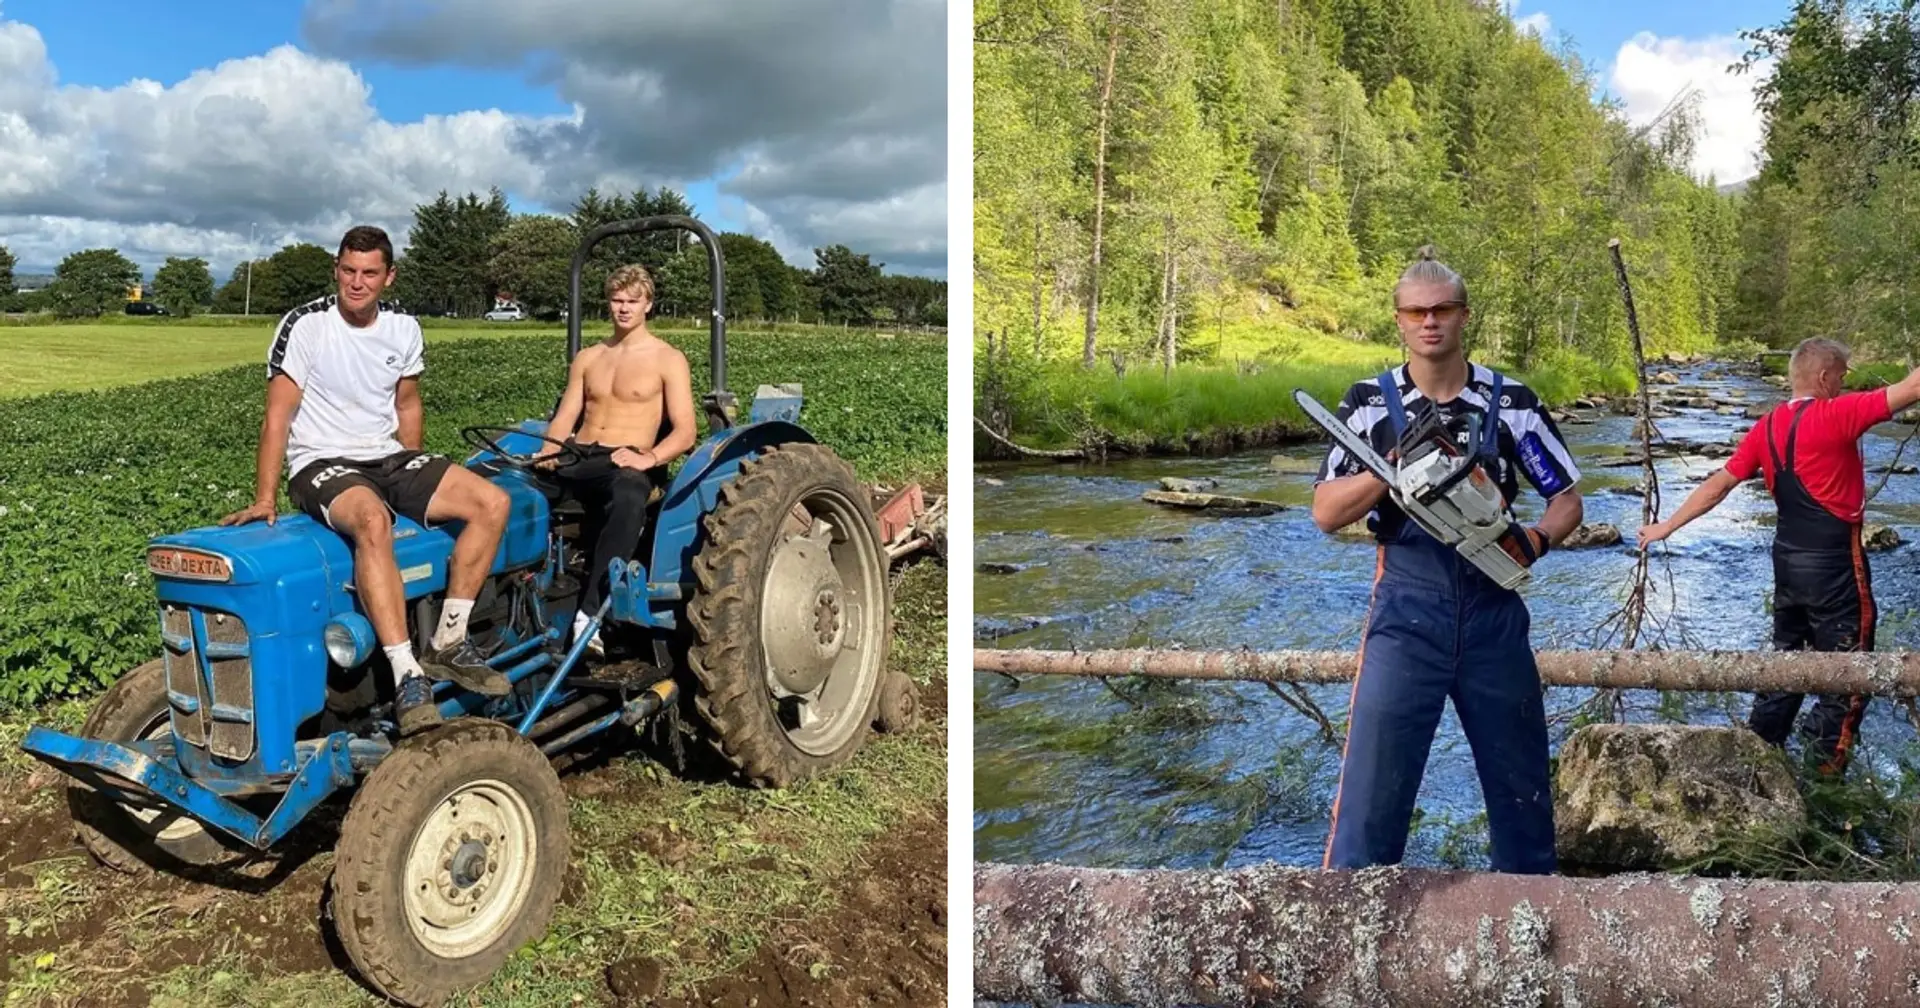 Erling Haaland swaps Mercedes for tractor as he turns from nightclubbing to potato farming and cutting down trees